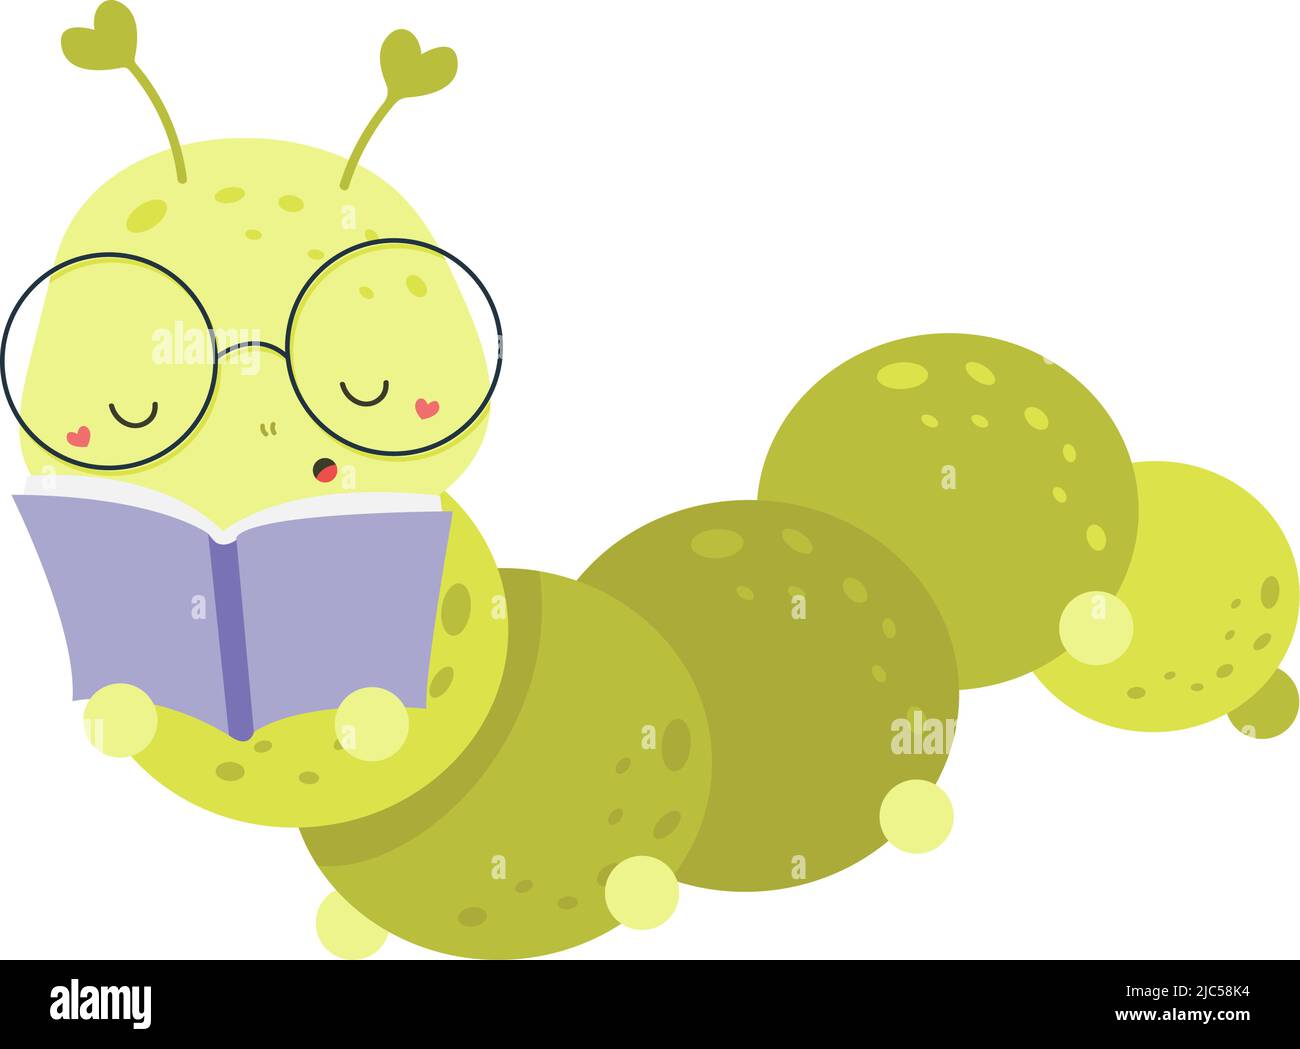 Cute Caterpillar Clipart Isolated on White Background. Funny Clip Art Caterpillar Reading a Book. Vector Illustration of an Animal for Coloring Pages Stock Vector